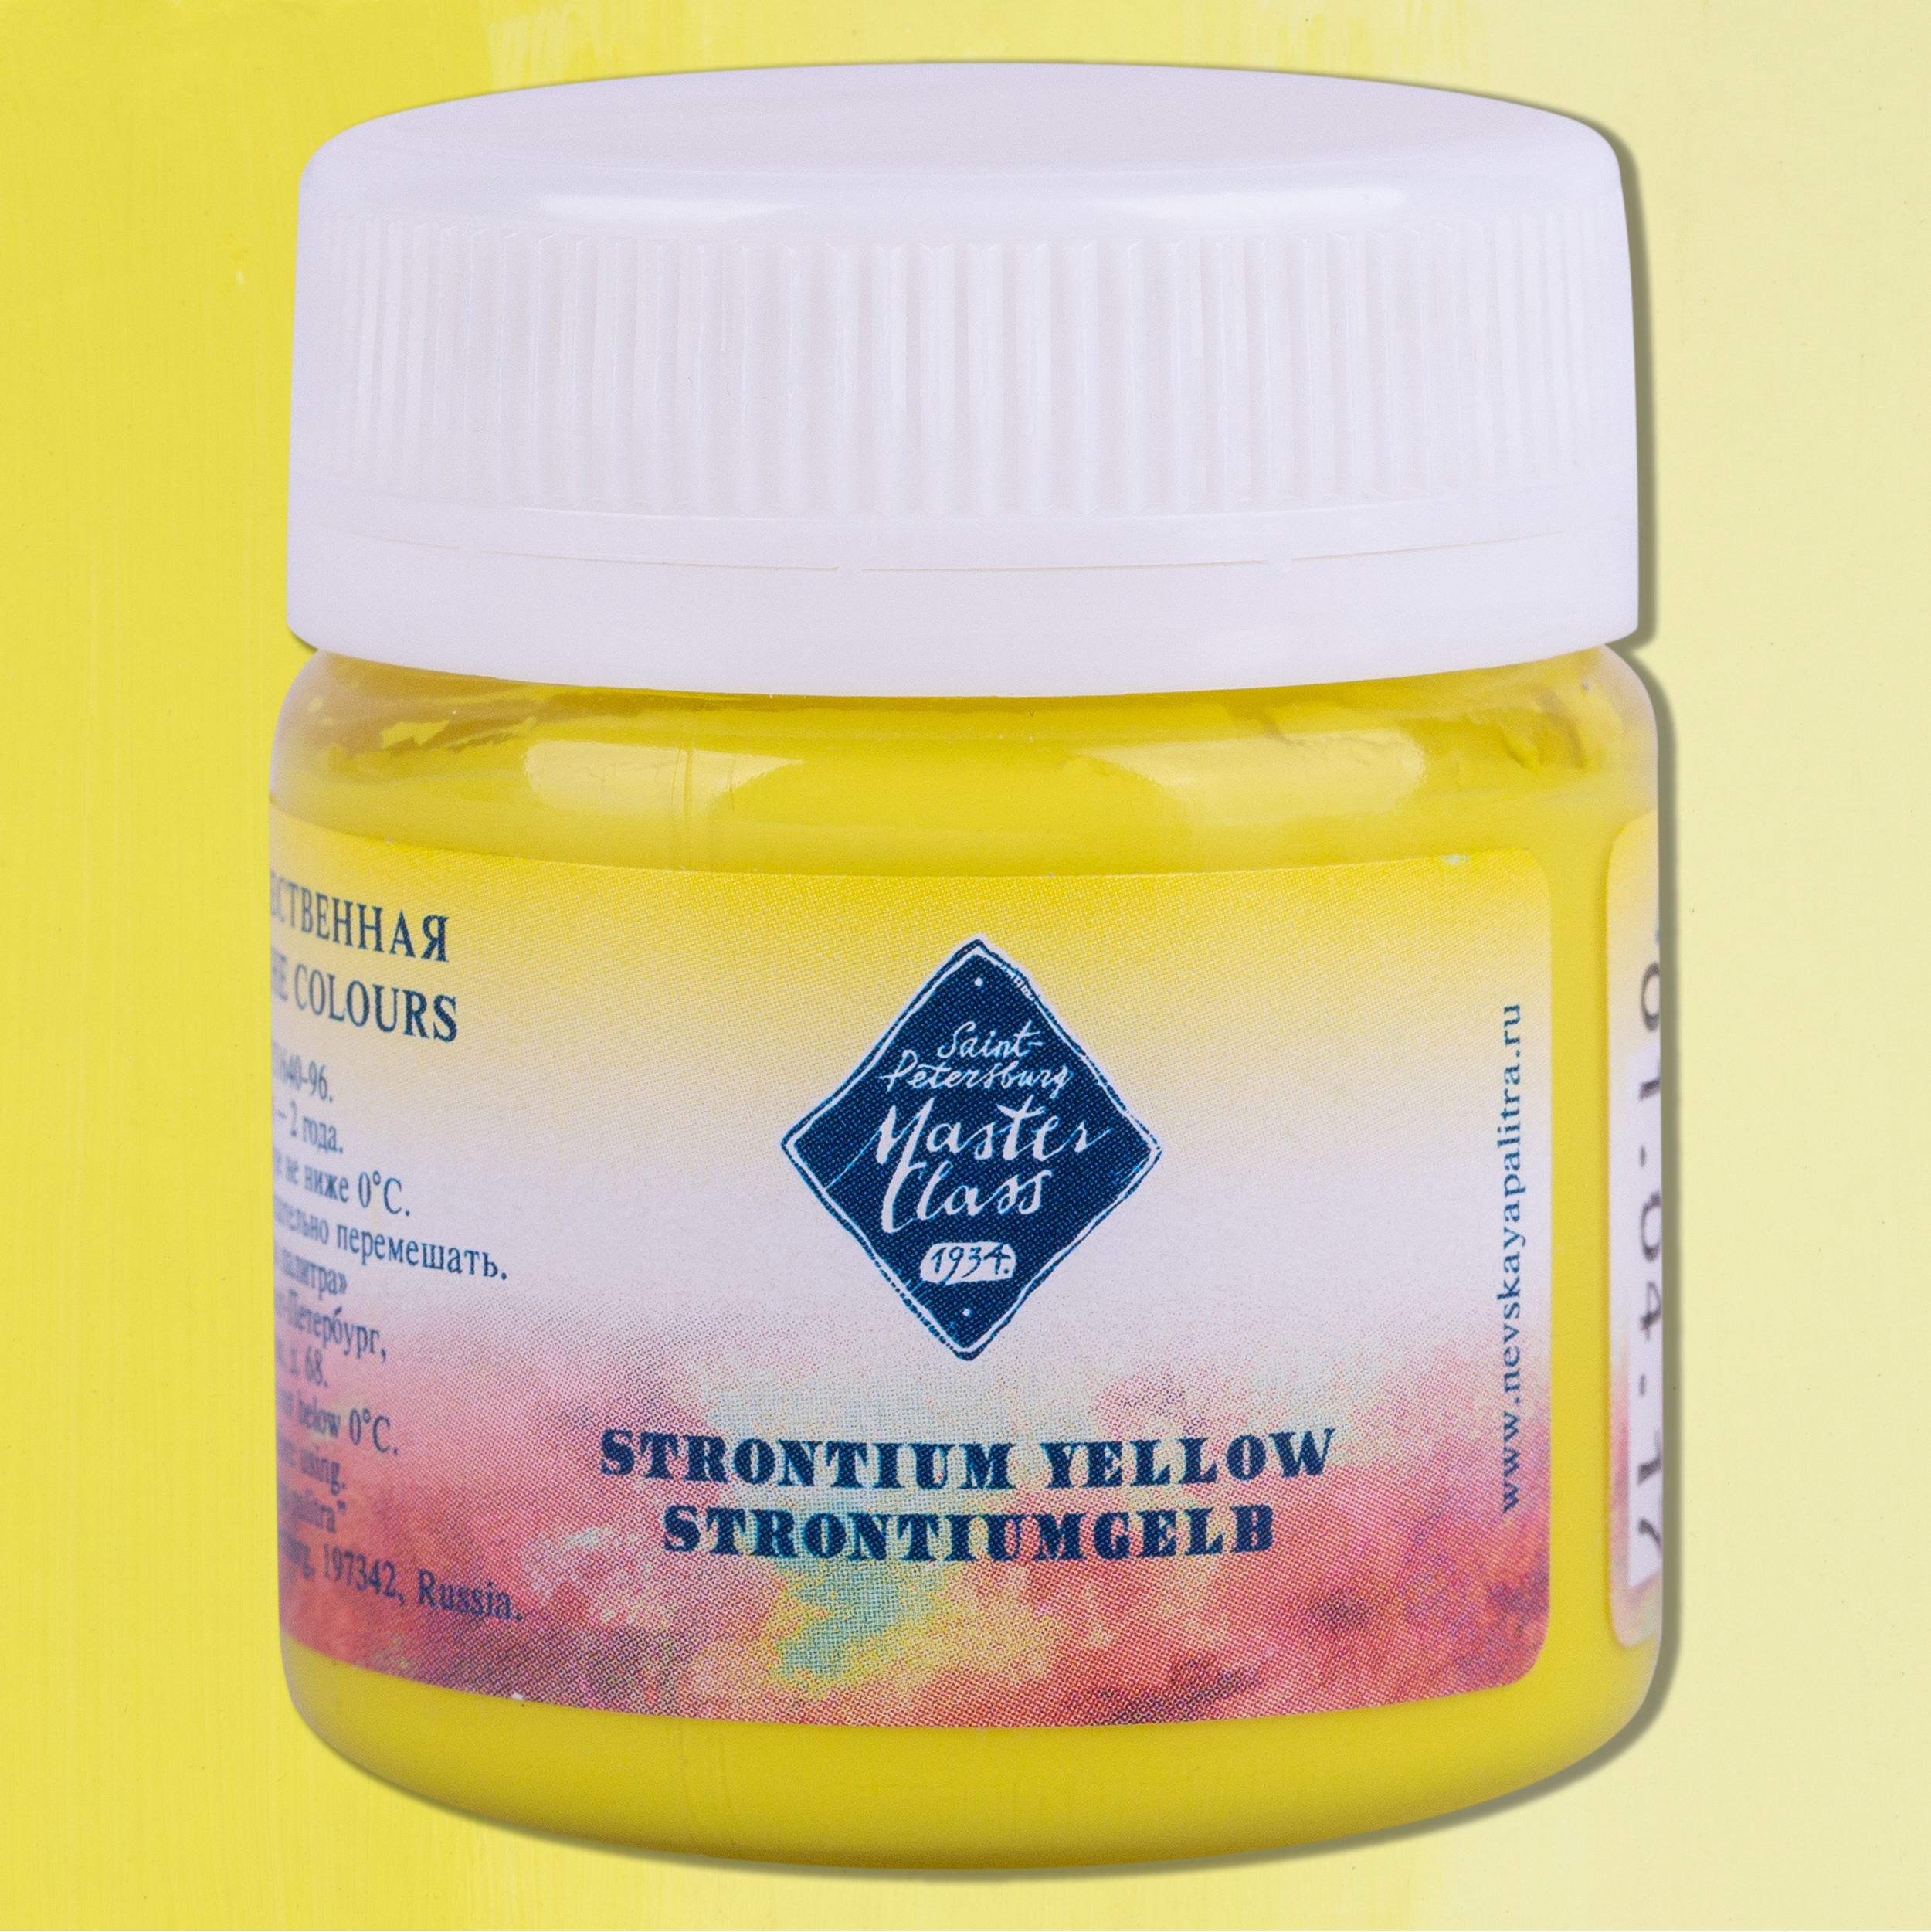 Strontium yellow "Master Class" in the jar. № 207